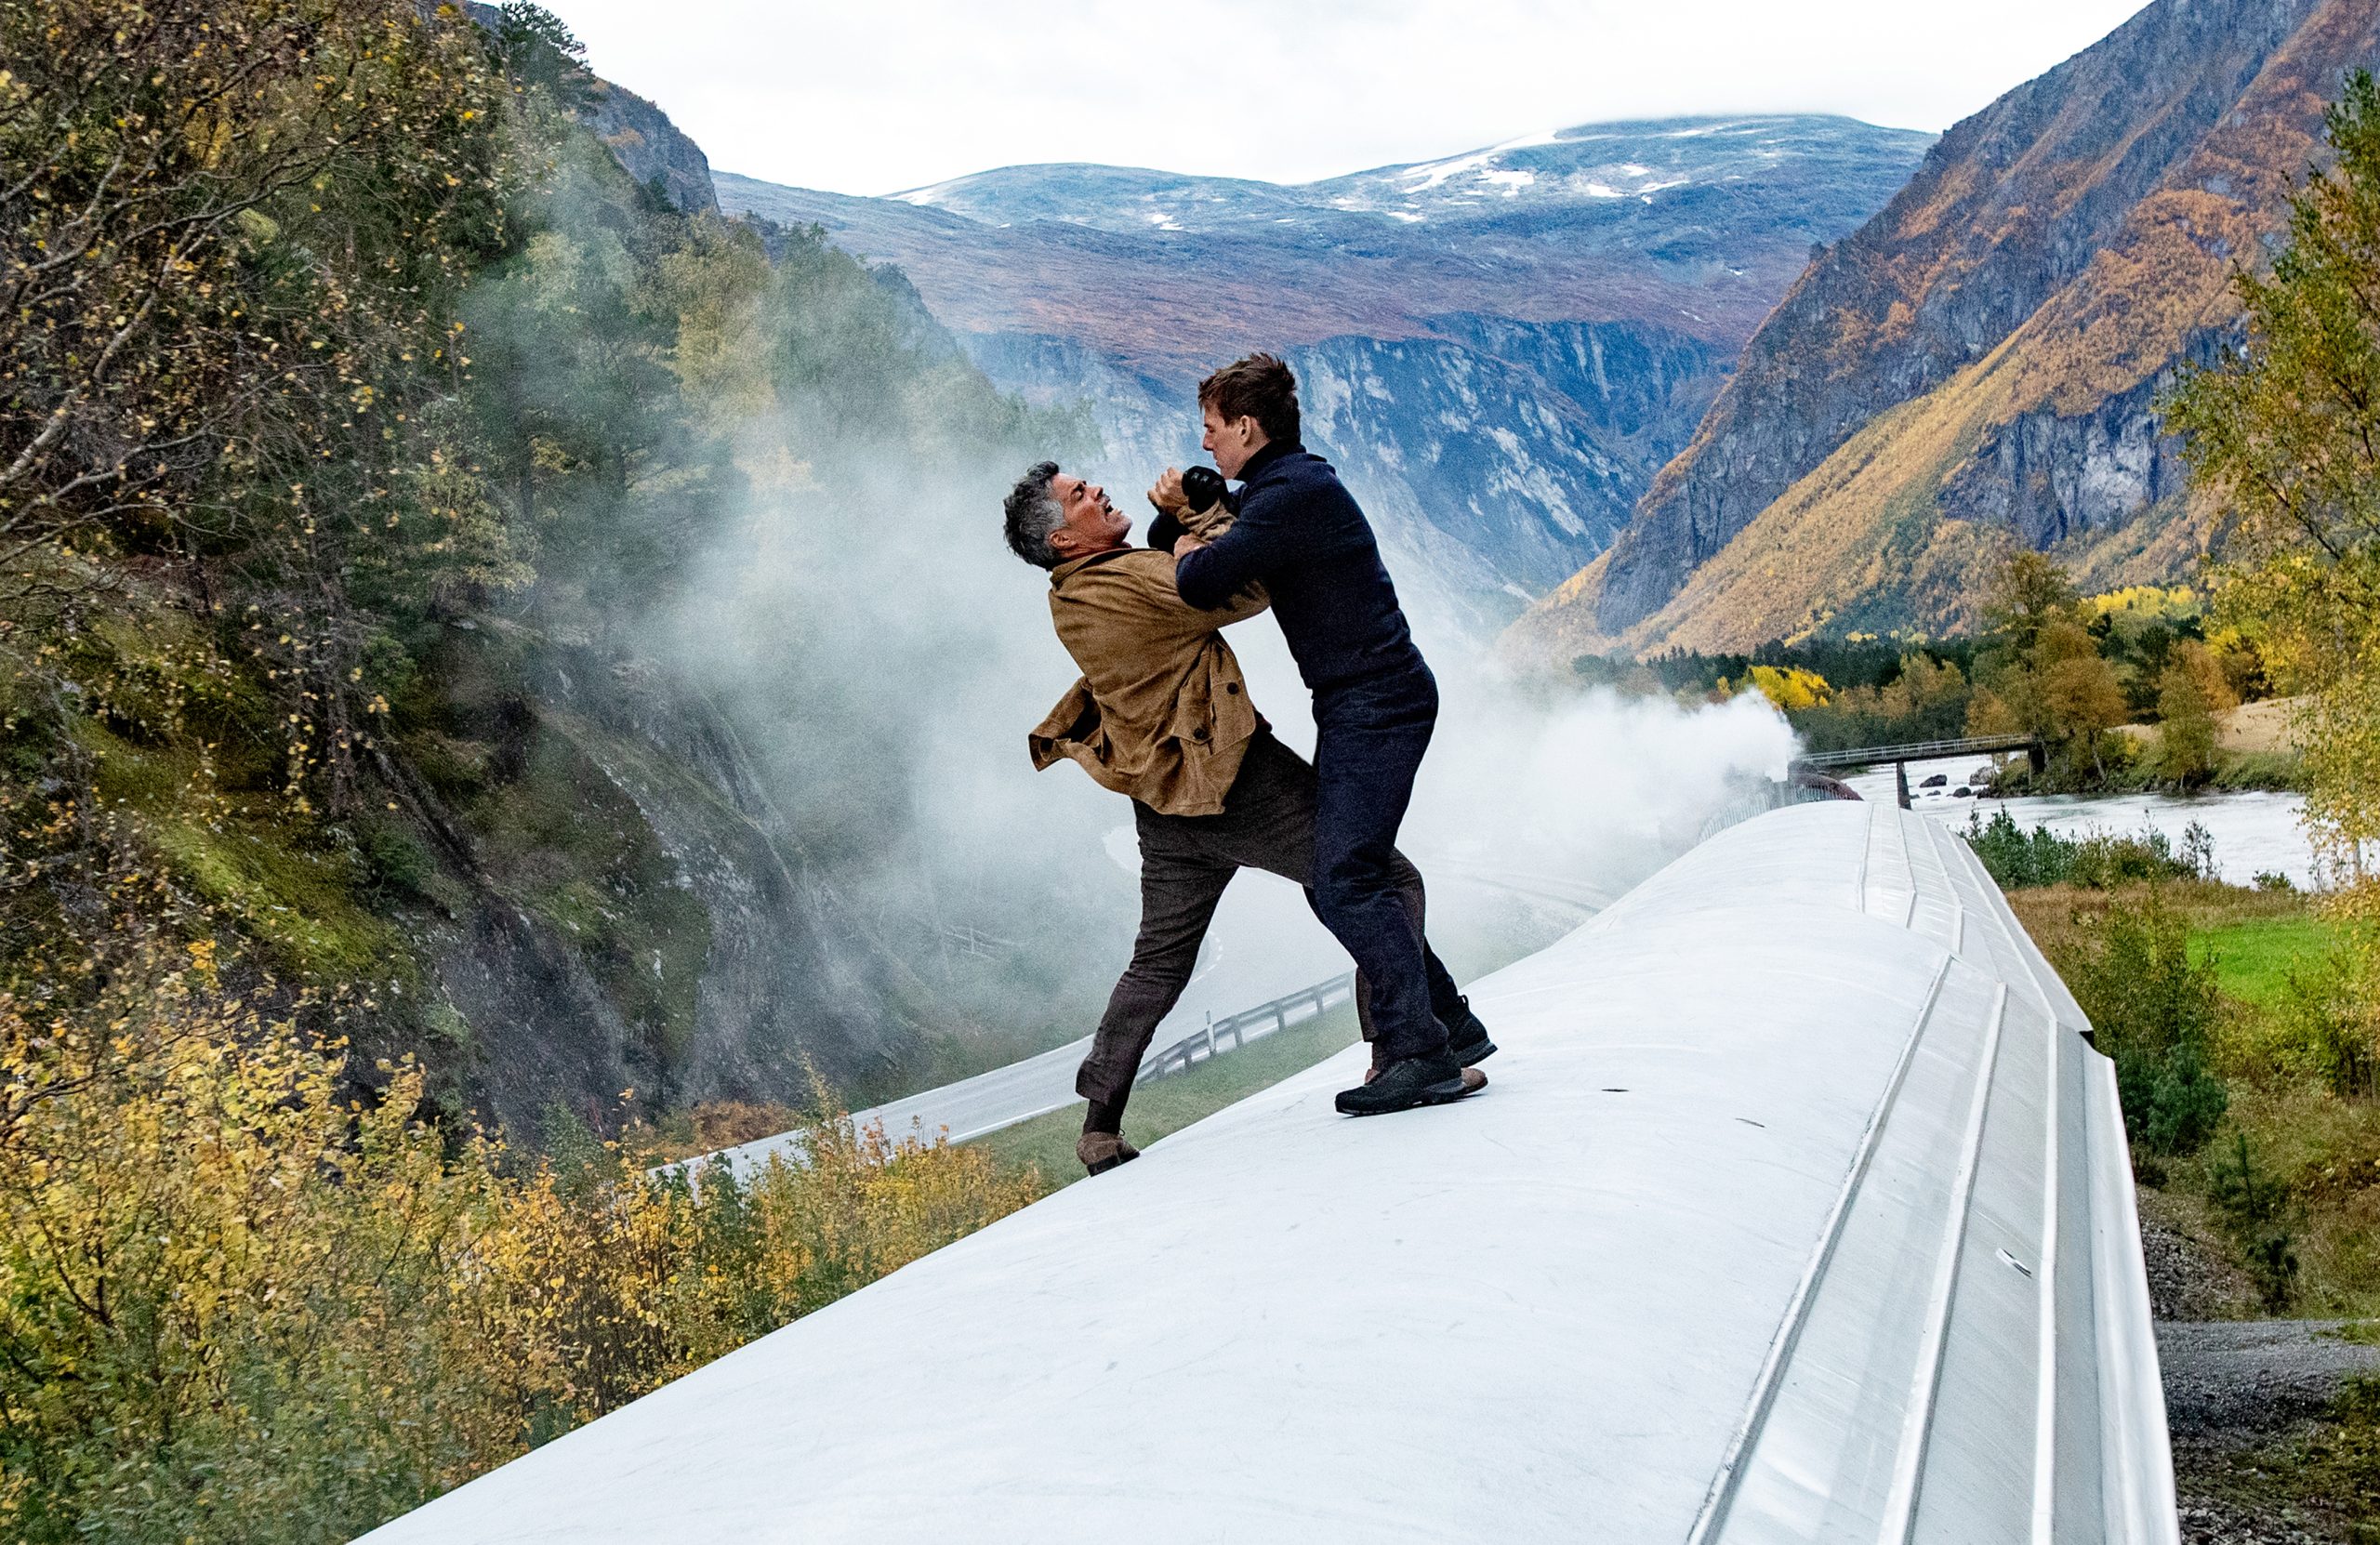 High-definition desktop wallpaper featuring an intense action scene from Mission: Impossible - Dead Reckoning Part One with two characters in a gripping confrontation atop a train, set against a stunning mountainous backdrop.